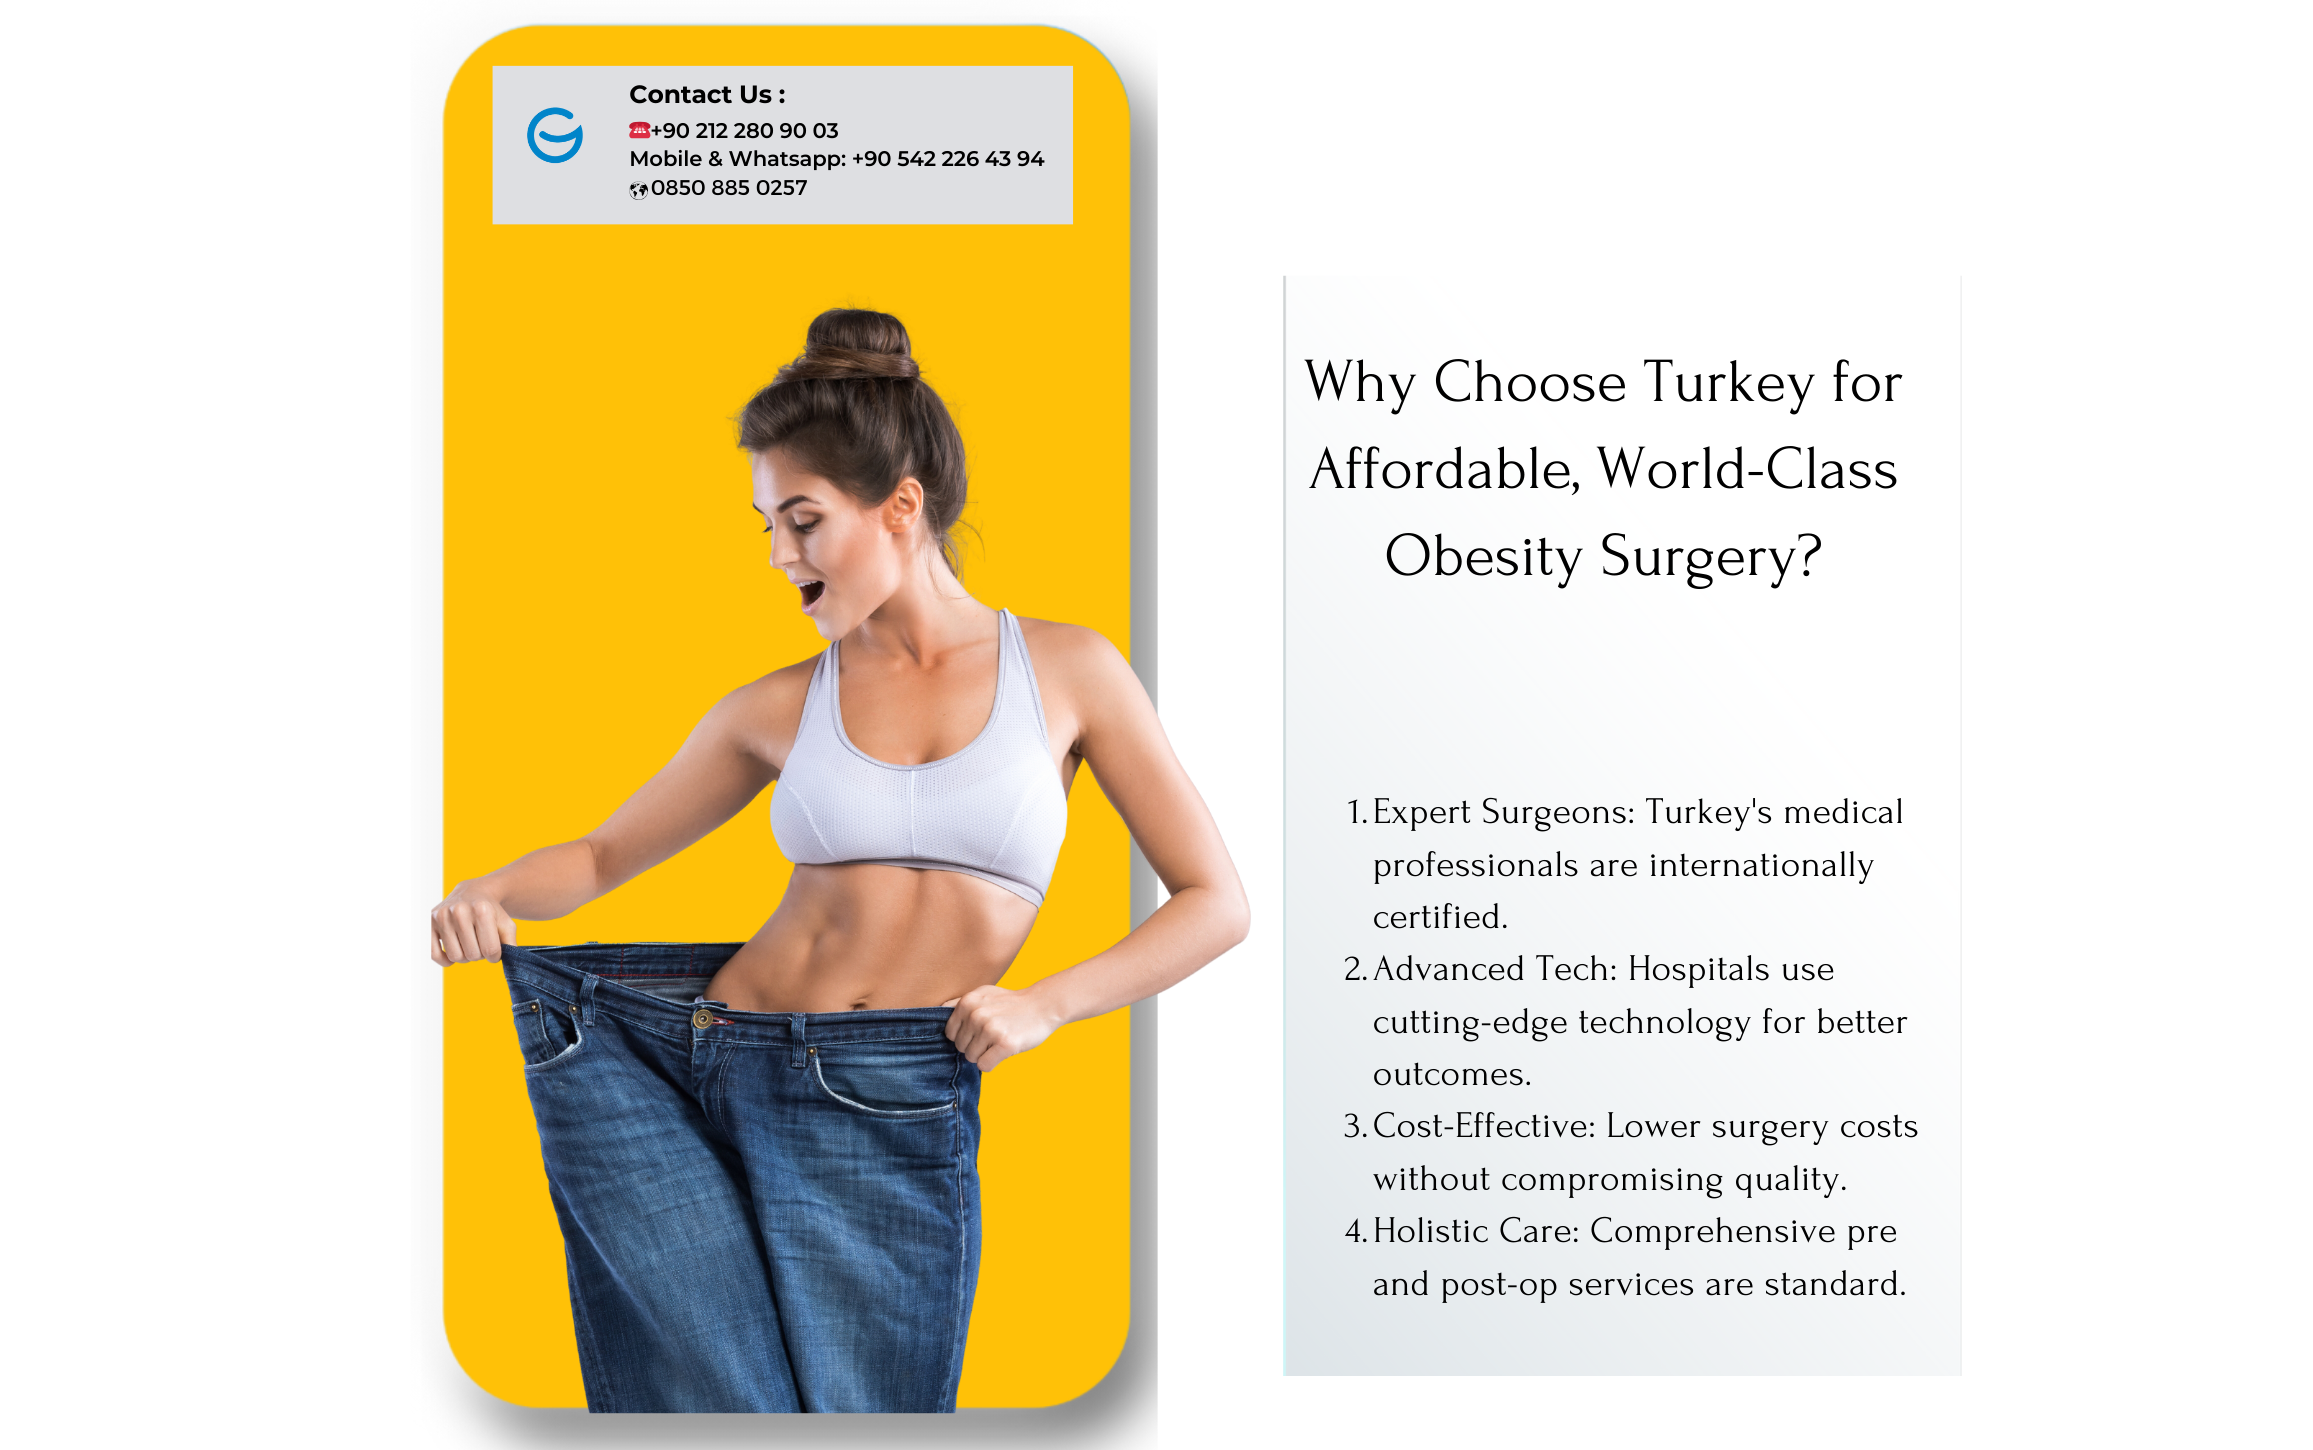 World-Class and Affordable Obesity Surgery